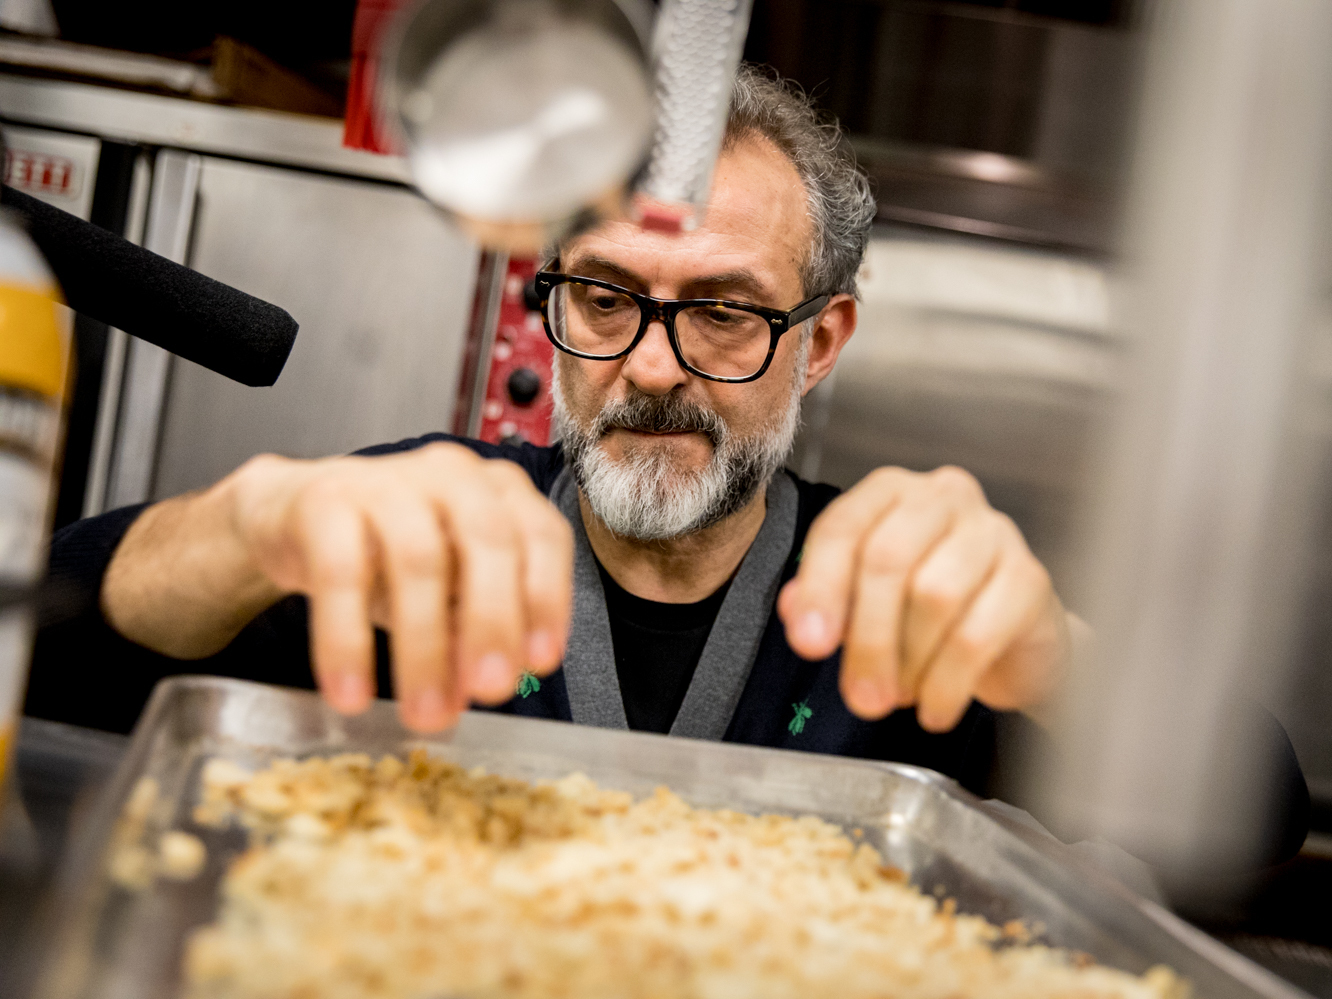 Chef Massimo Bottura creates a meal from Thanksgiving leftovers in NPR's kitchen. "The leftover is a big problem if you don't have a vision, if you don't have the knowledge of what you can do," he says. Above, he checks the breadcrumbs to make sure they're dry and fine enough to turn into a pasta called passatelli.